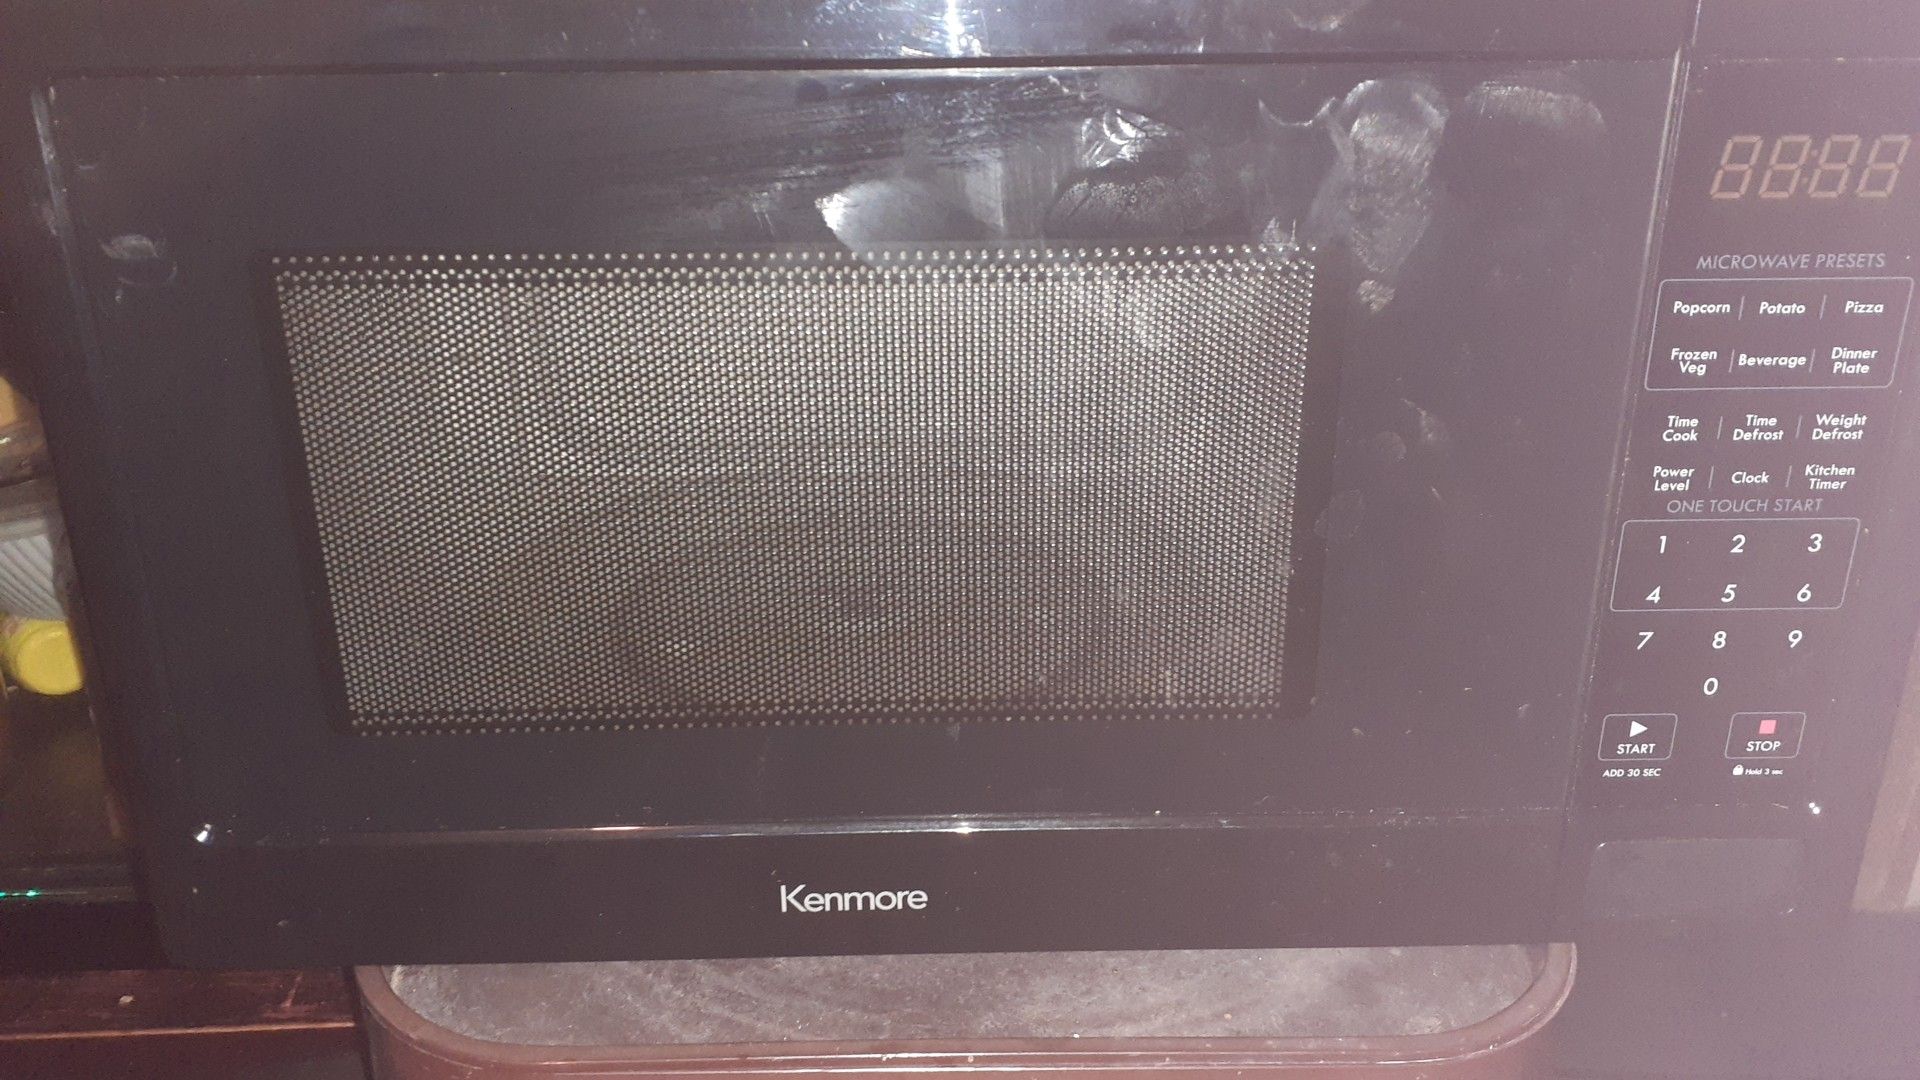 Brand new never used Kenmore microwave